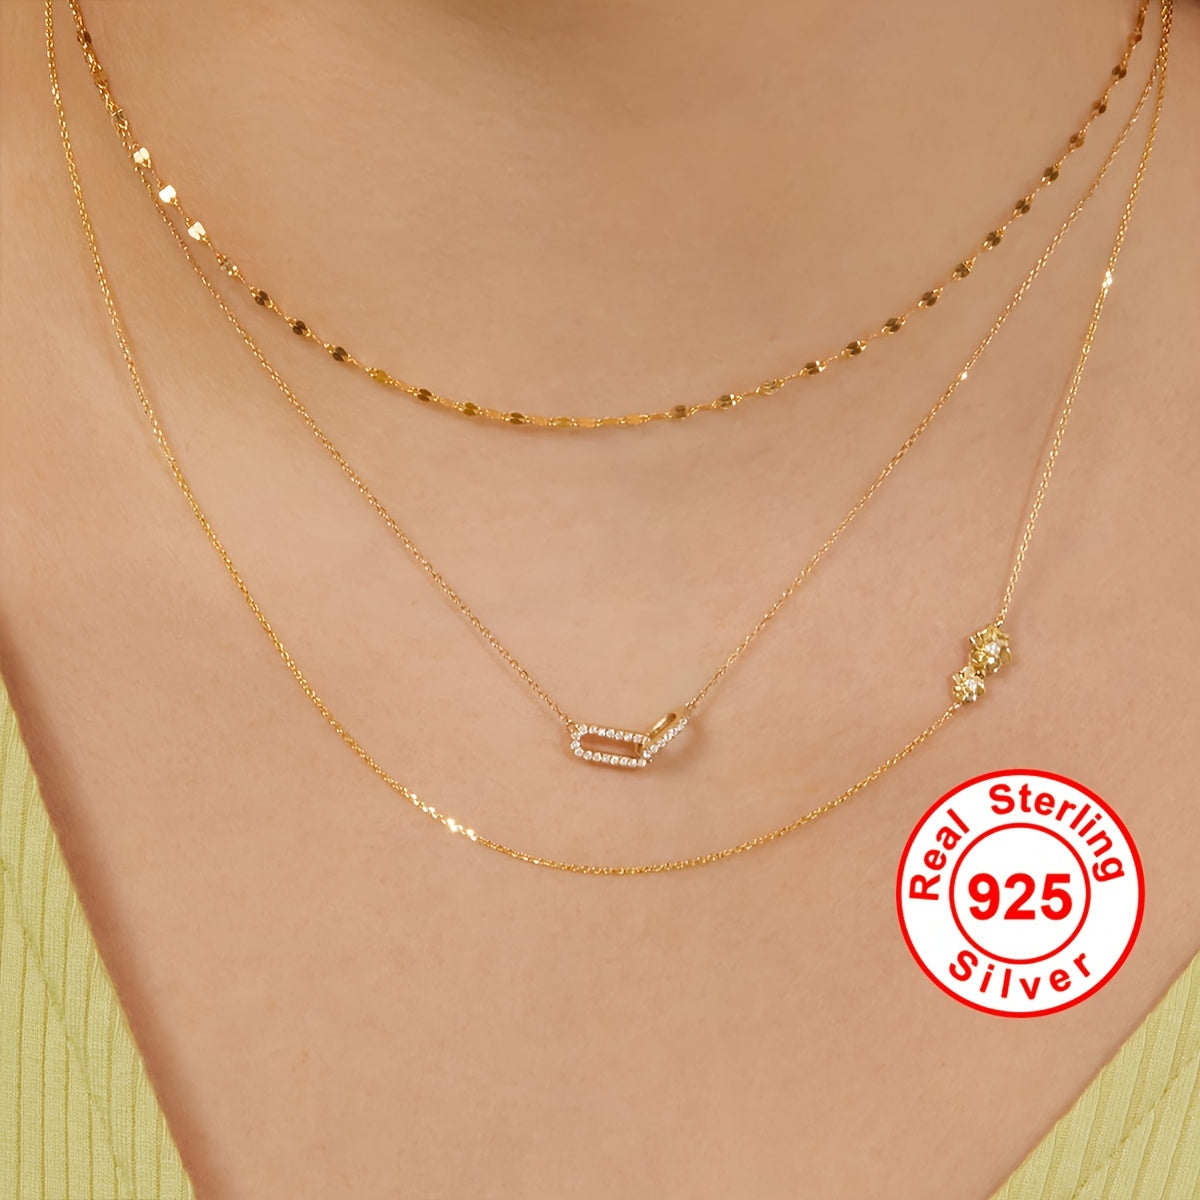 18K Gold Paperclip Necklace, Paperclip Diamond Necklace, Dainty Minimalist Necklace, Anniversary Birthday Valentine's Day Gift